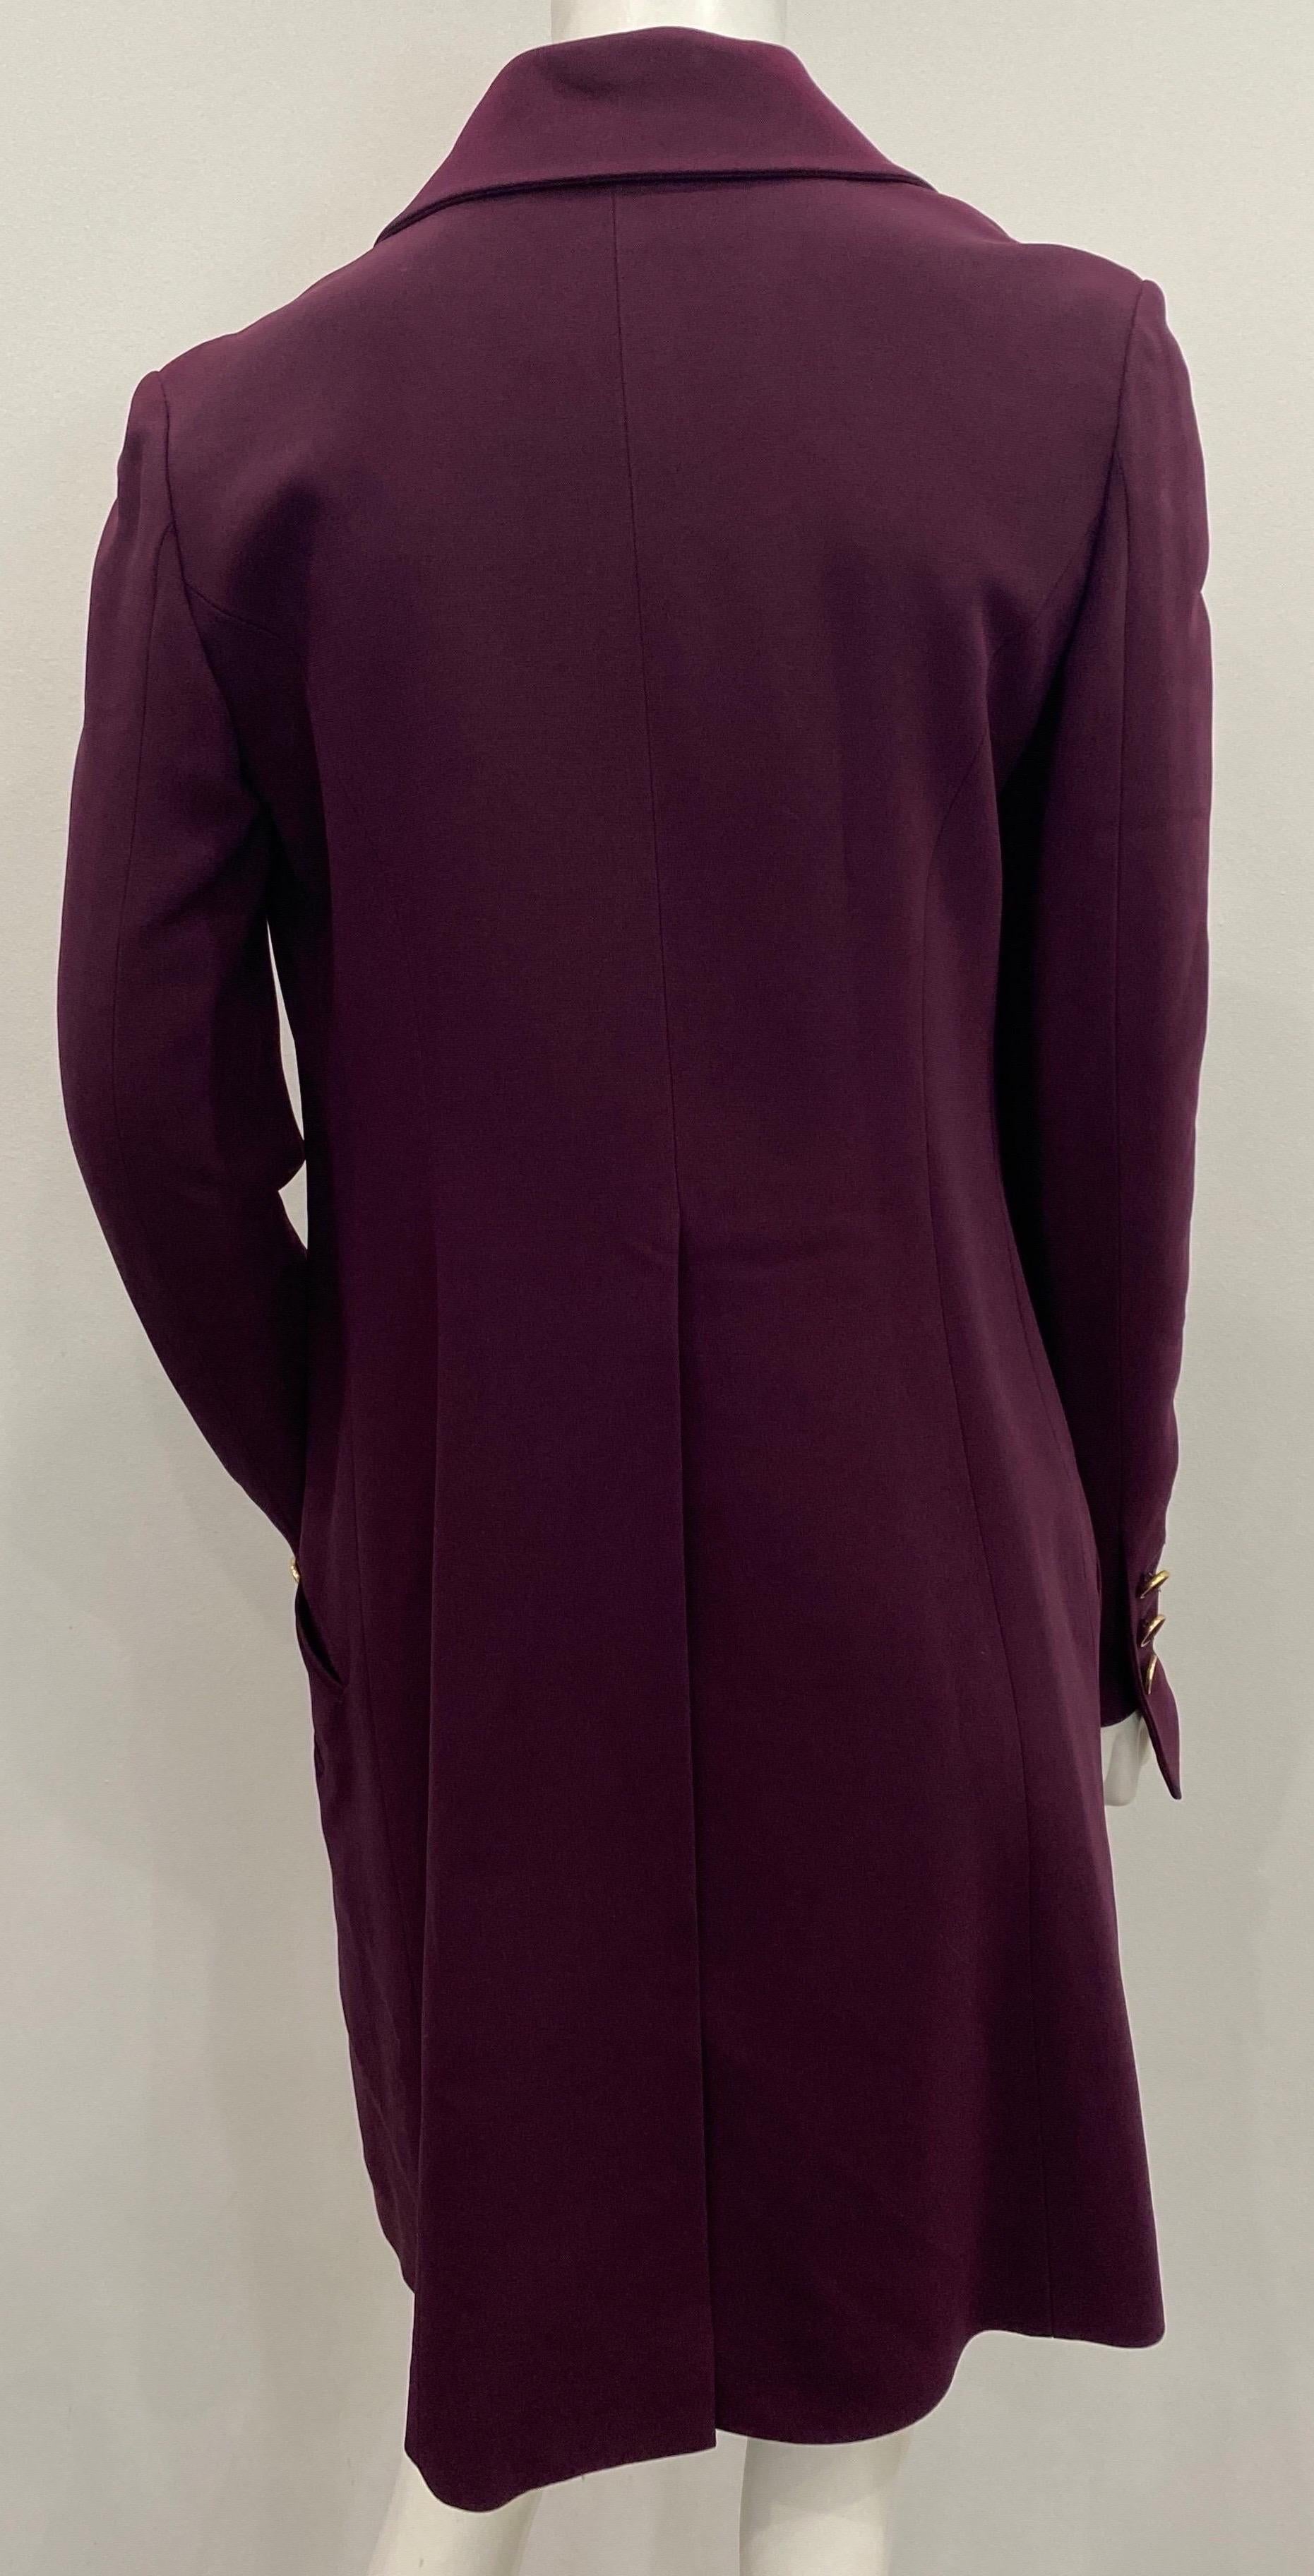 Karl Lagerfeld Eggplant 3/4 Coat - Size 36 For Sale 6